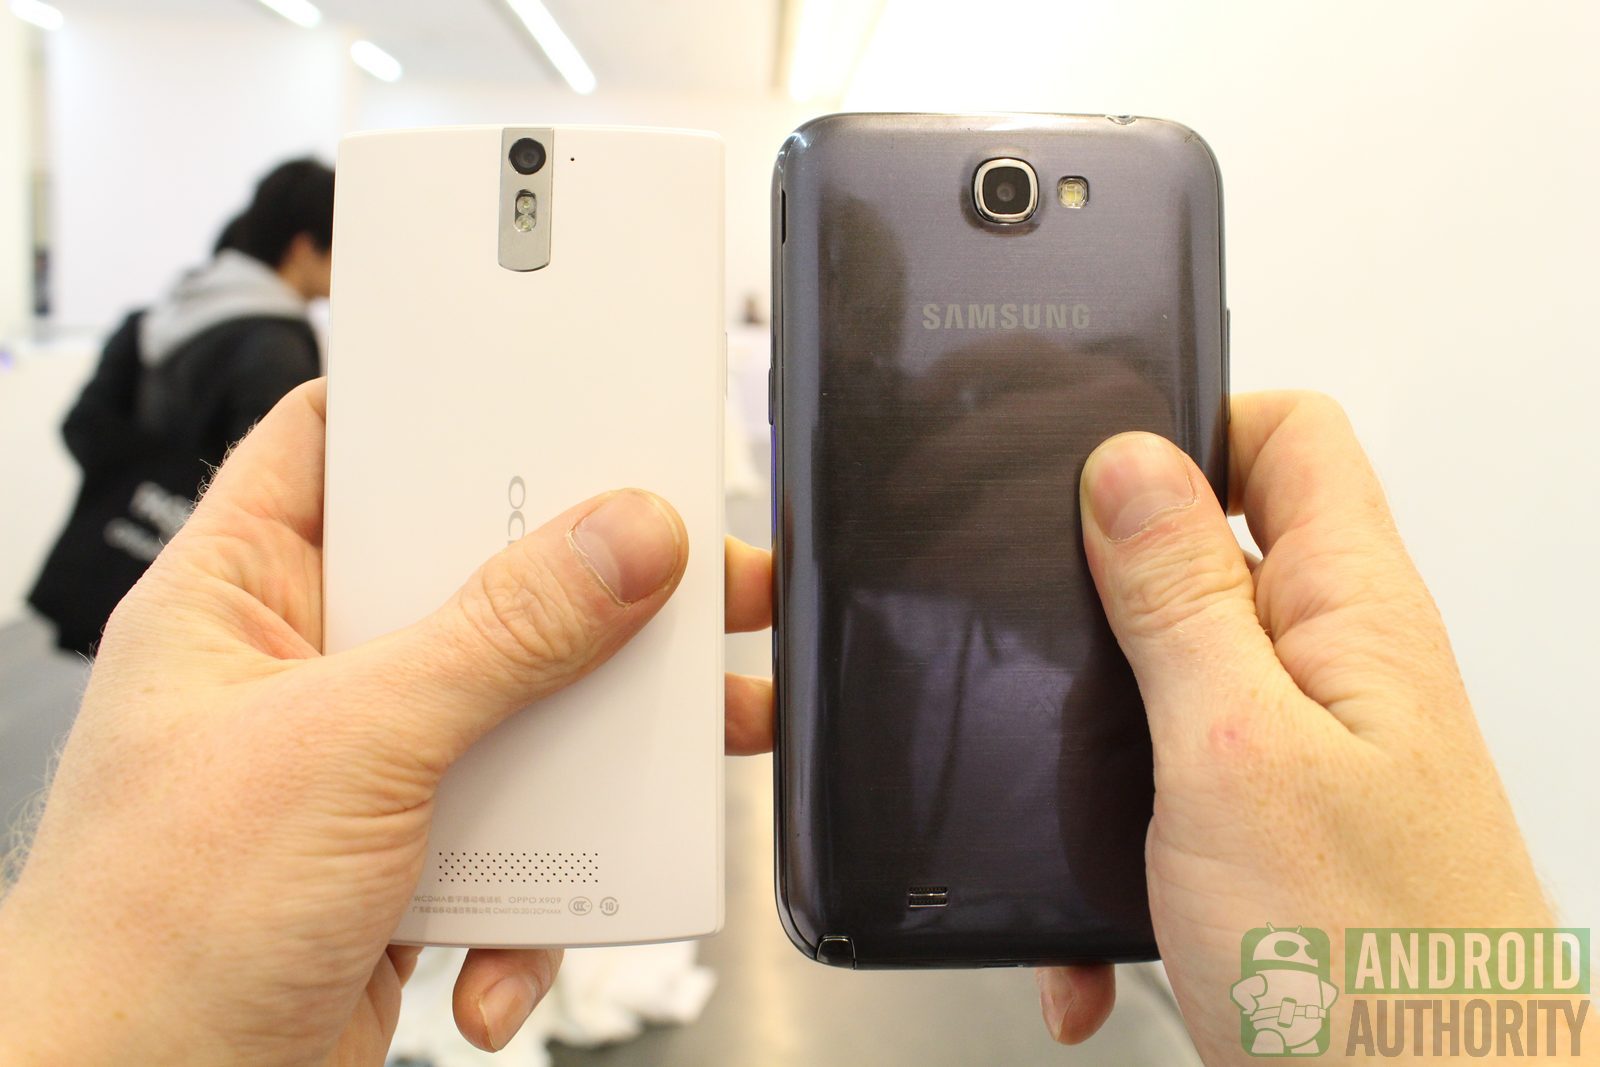 Oppo Find 5 vs Galaxy Note 2 back 4_1600px